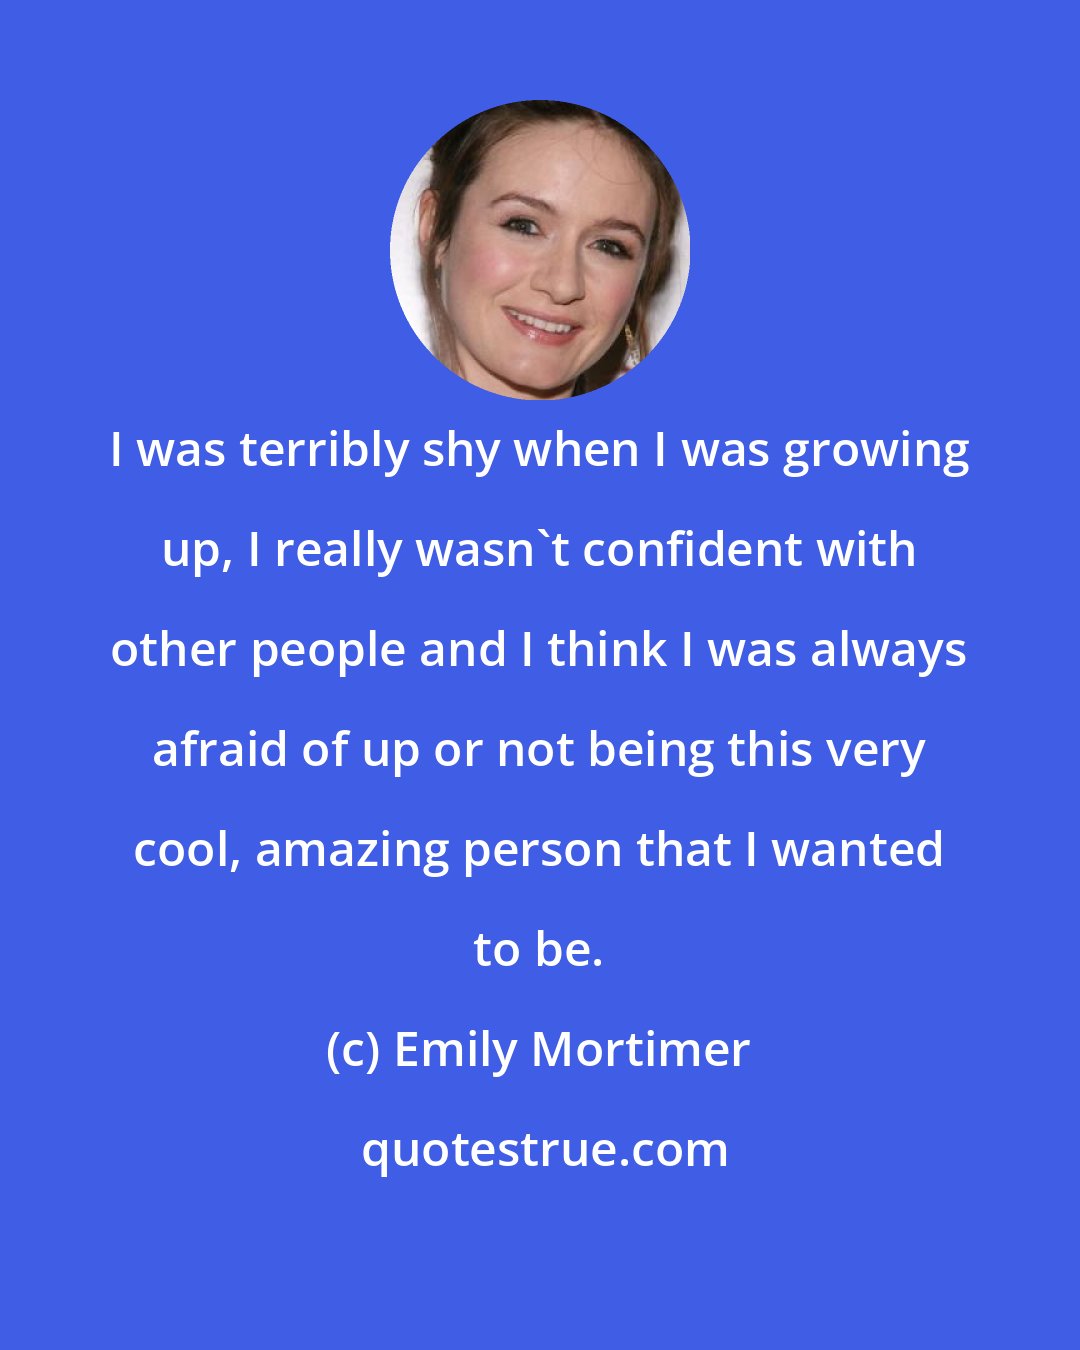 Emily Mortimer: I was terribly shy when I was growing up, I really wasn't confident with other people and I think I was always afraid of up or not being this very cool, amazing person that I wanted to be.